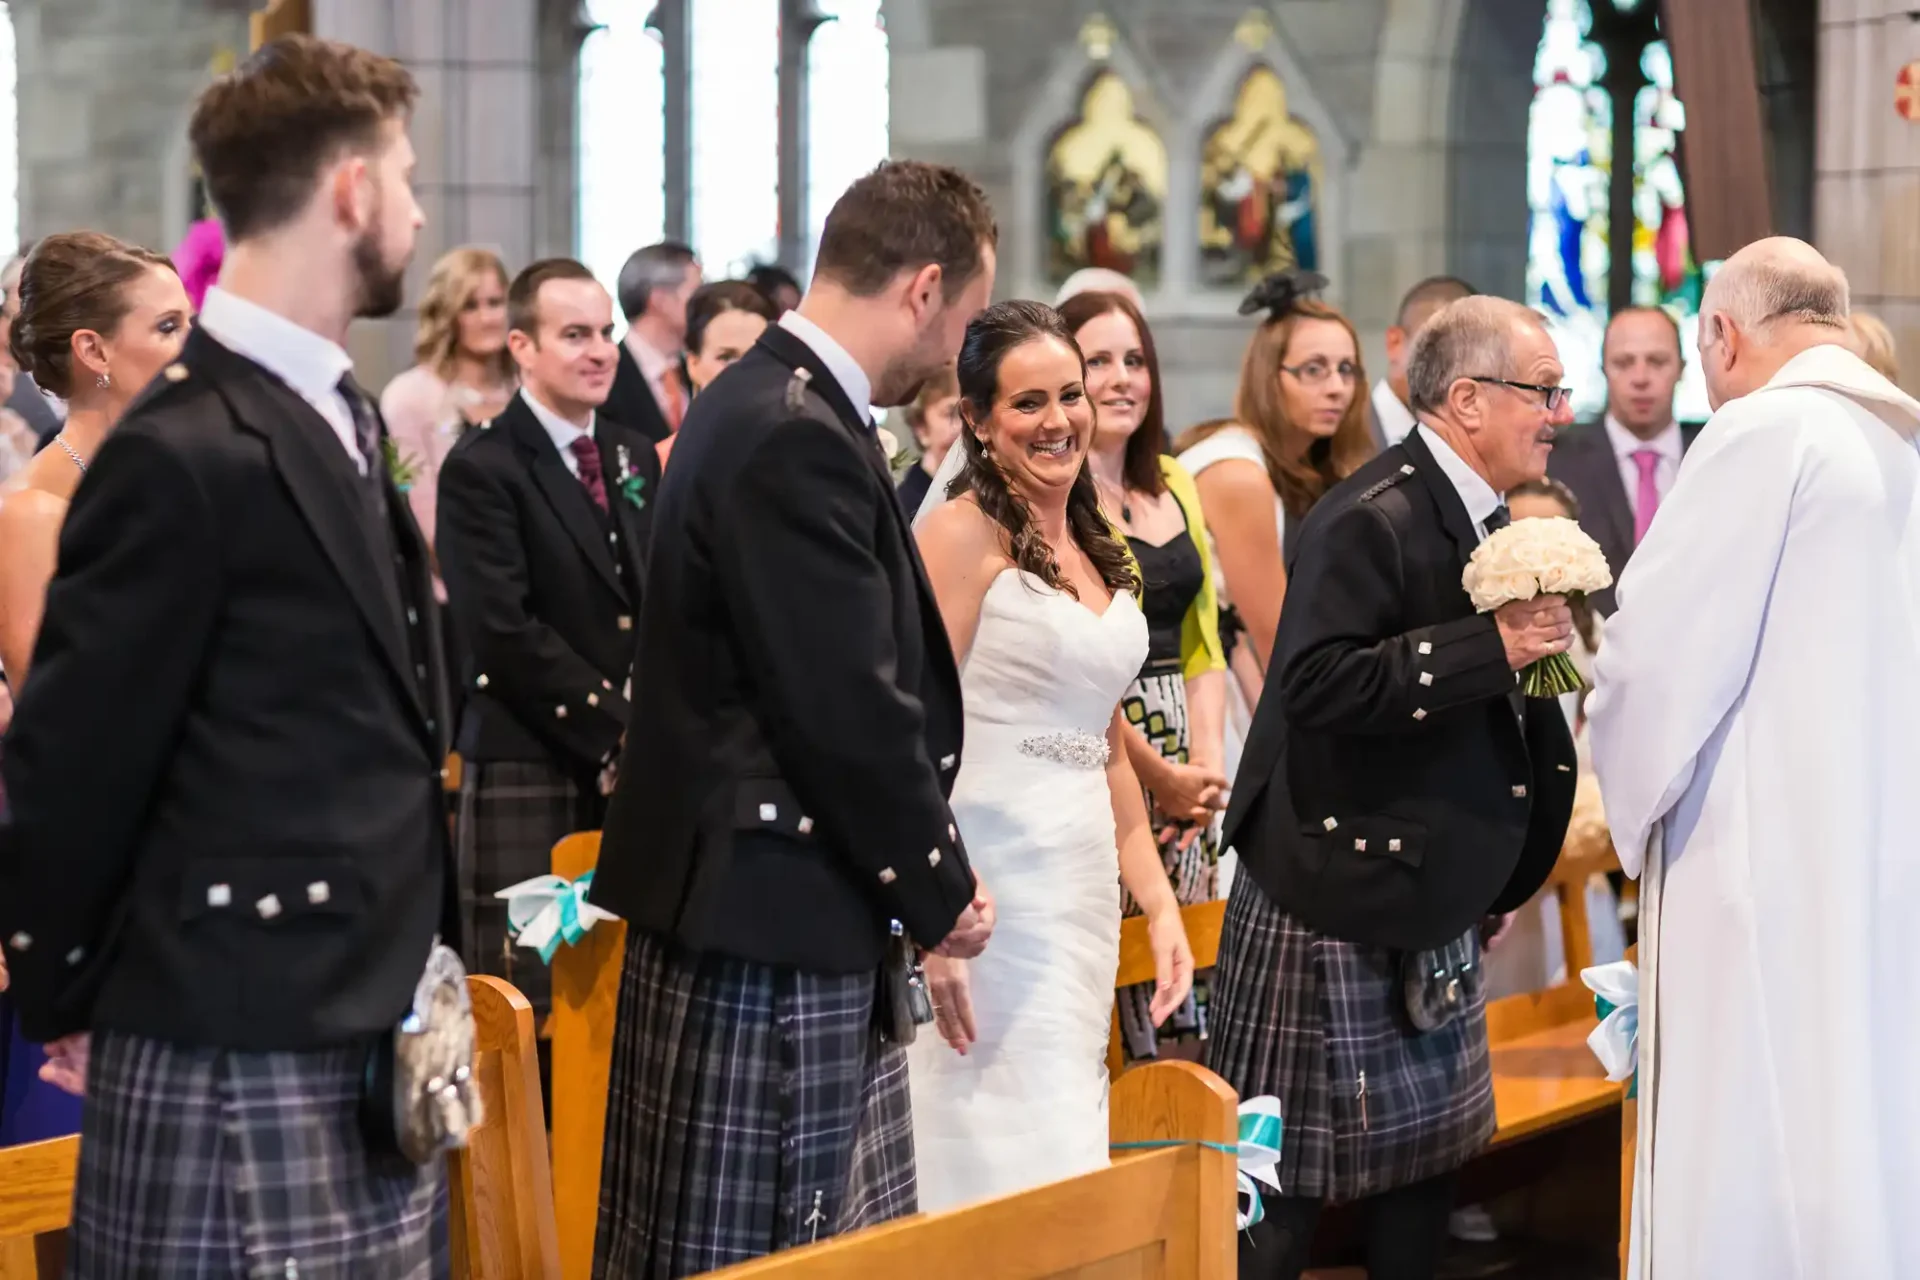 Bride and groom holding hands during a wedding ceremony in a church, surrounded by guests in traditional scottish attire.